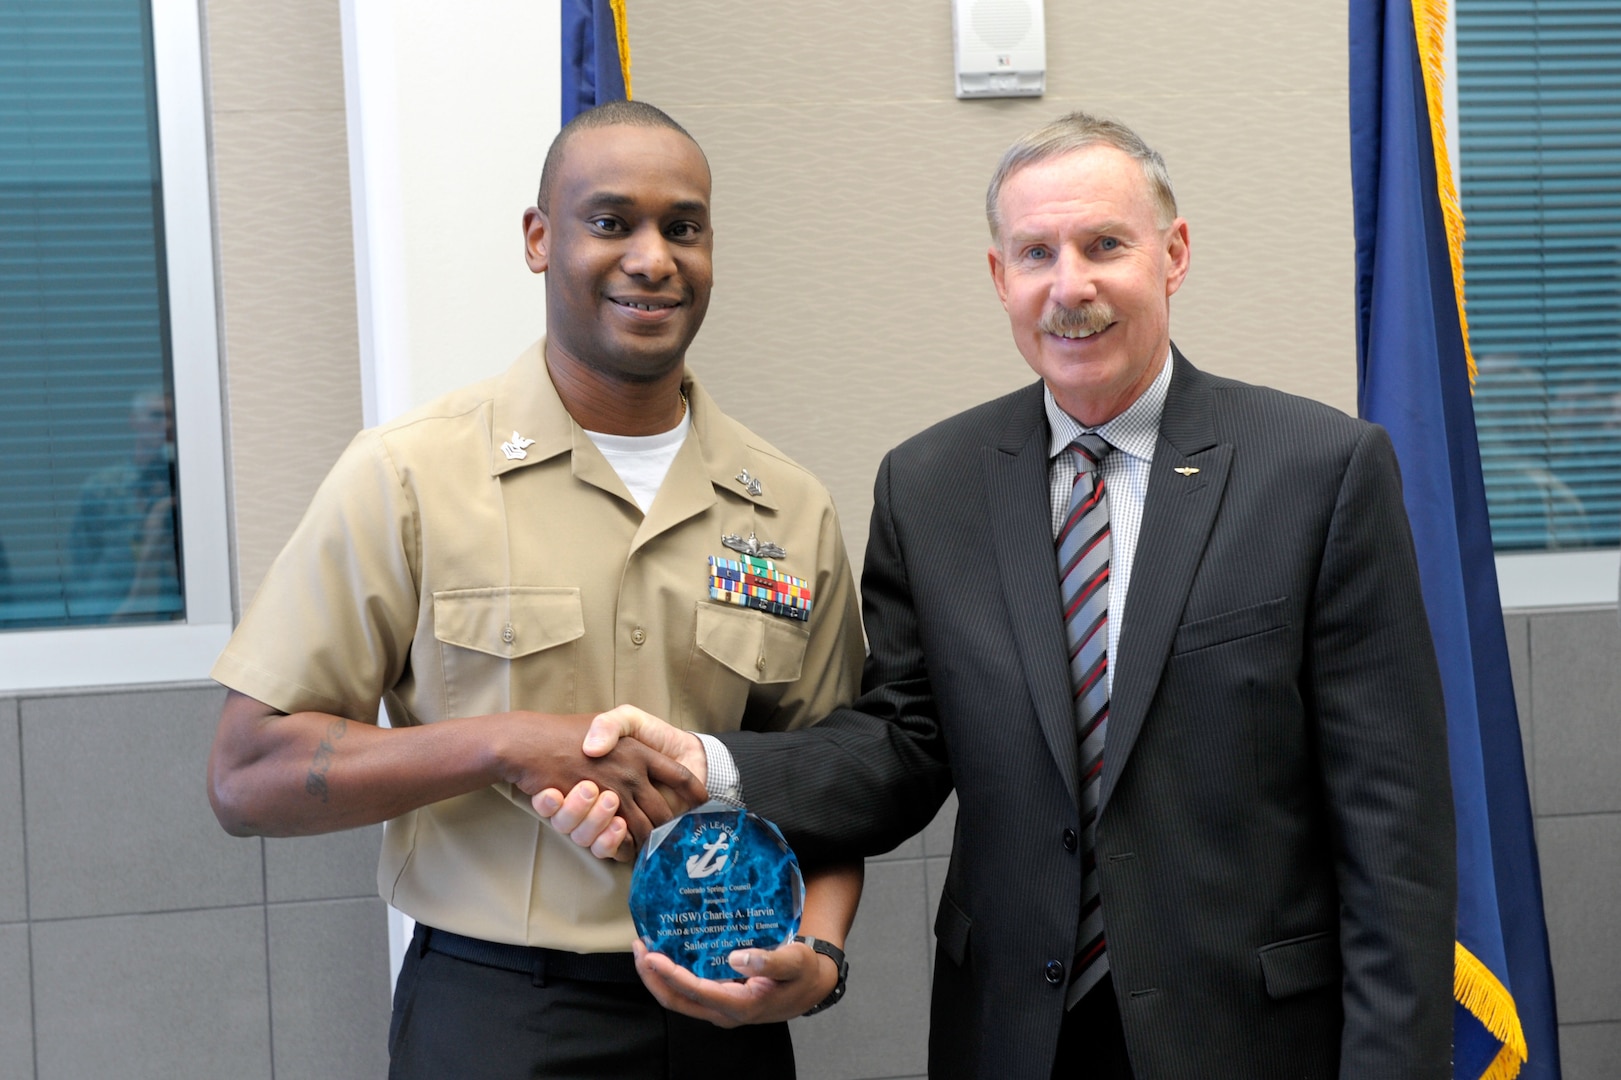 Representatives from the Colorado Springs Council of the Navy League recognized North American Aerospace Defense Command and U.S. Northern Command’s Sailor of the Year during a ceremony here Jan. 27. Council President Capt. (U.S. Navy ret.) Roy Rodgers presents Petty Officer First Class Charles Harvin with a plaque in honor of his award. Harvin now competes with other combatant command nominees.